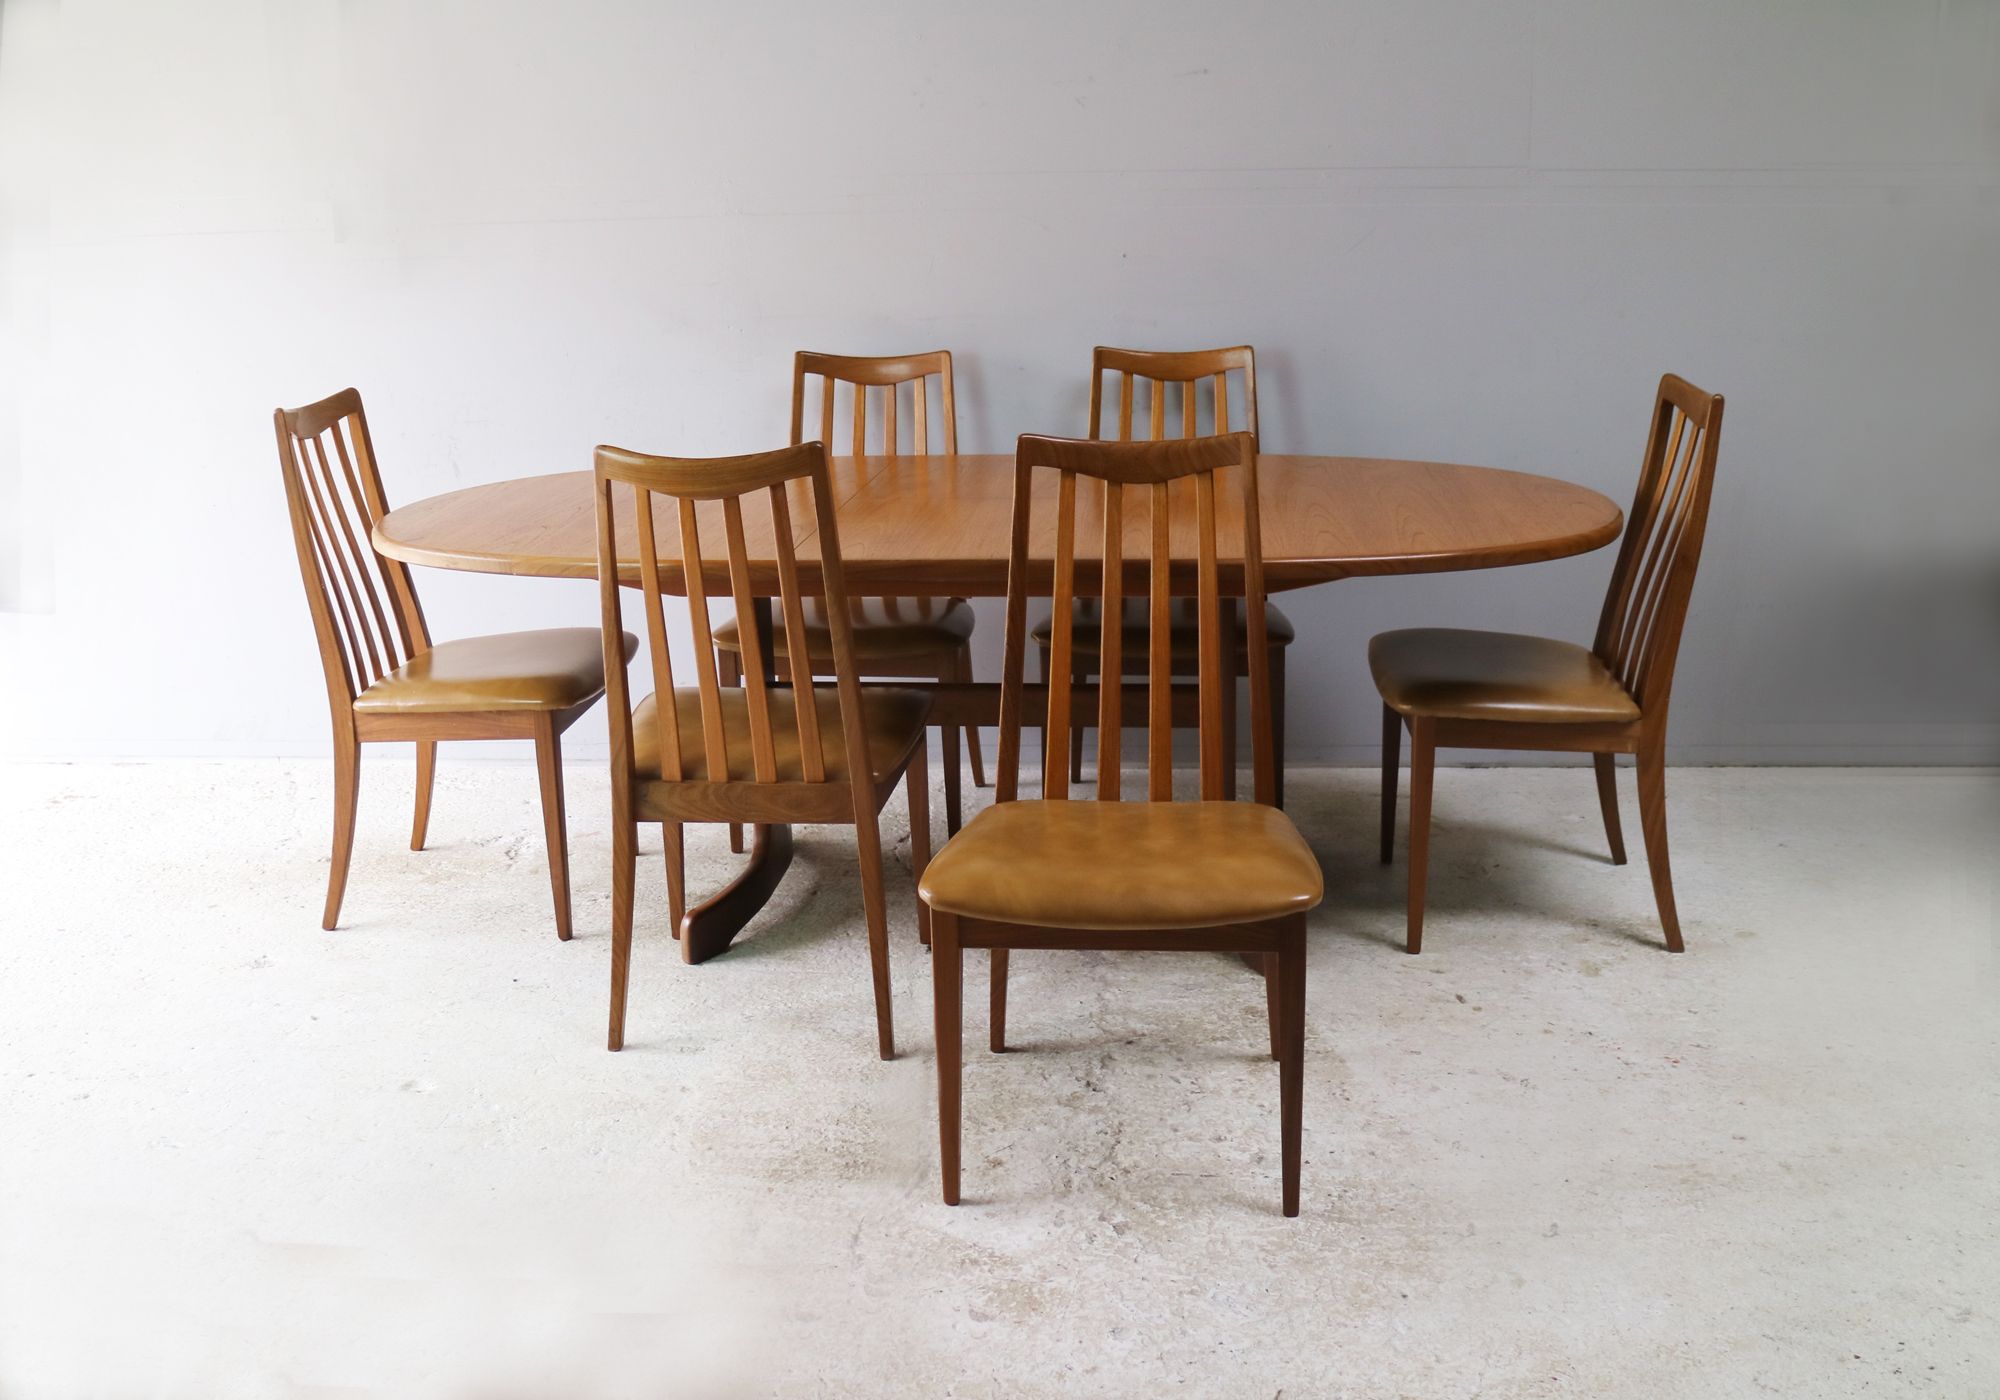 Set of 6 vintage dining chairs by G-plan,1970 - Design Market